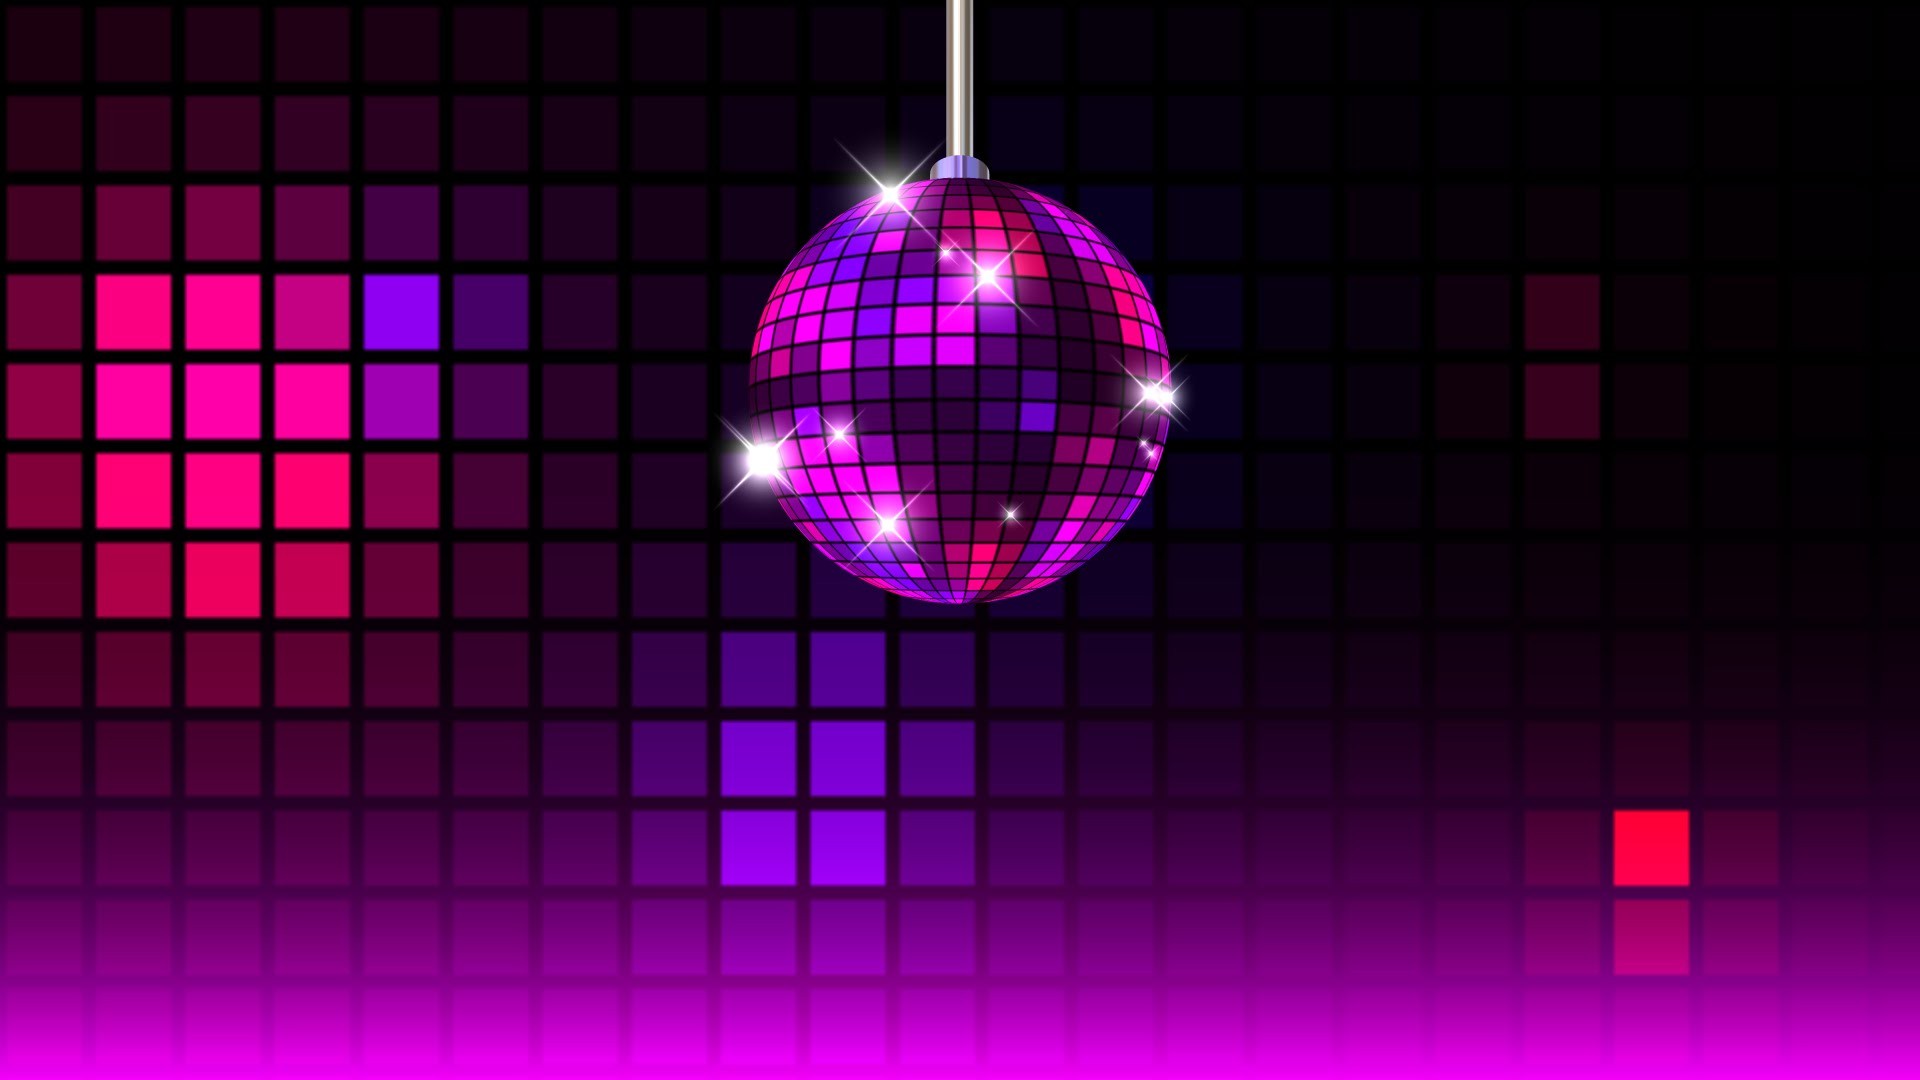 Disco Background Download Free Cool High Resolution HD Wallpapers Download Free Map Images Wallpaper [wallpaper684.blogspot.com]